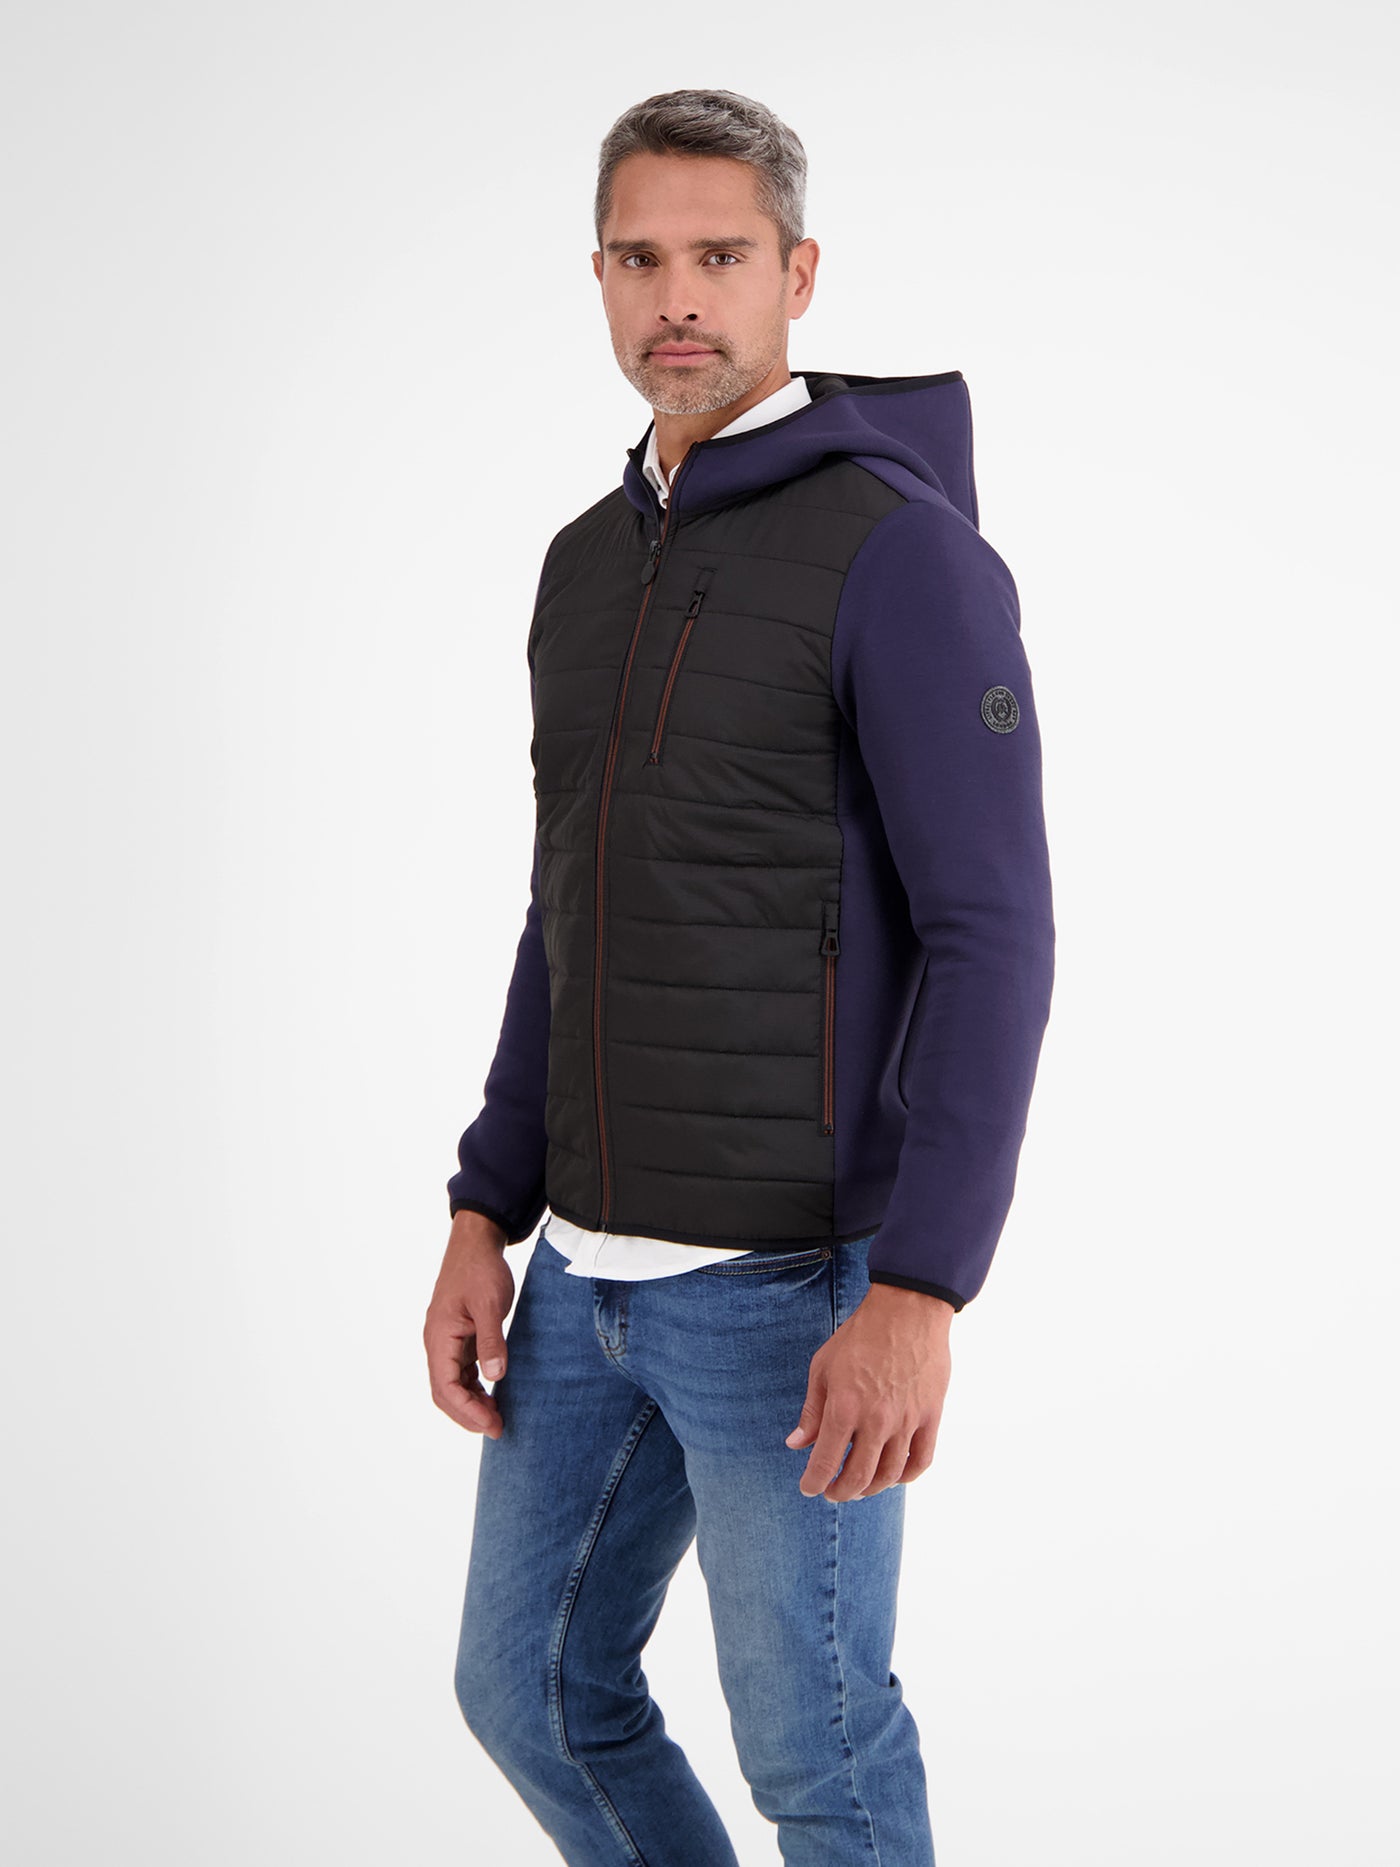 Softshell jacket with hoodie